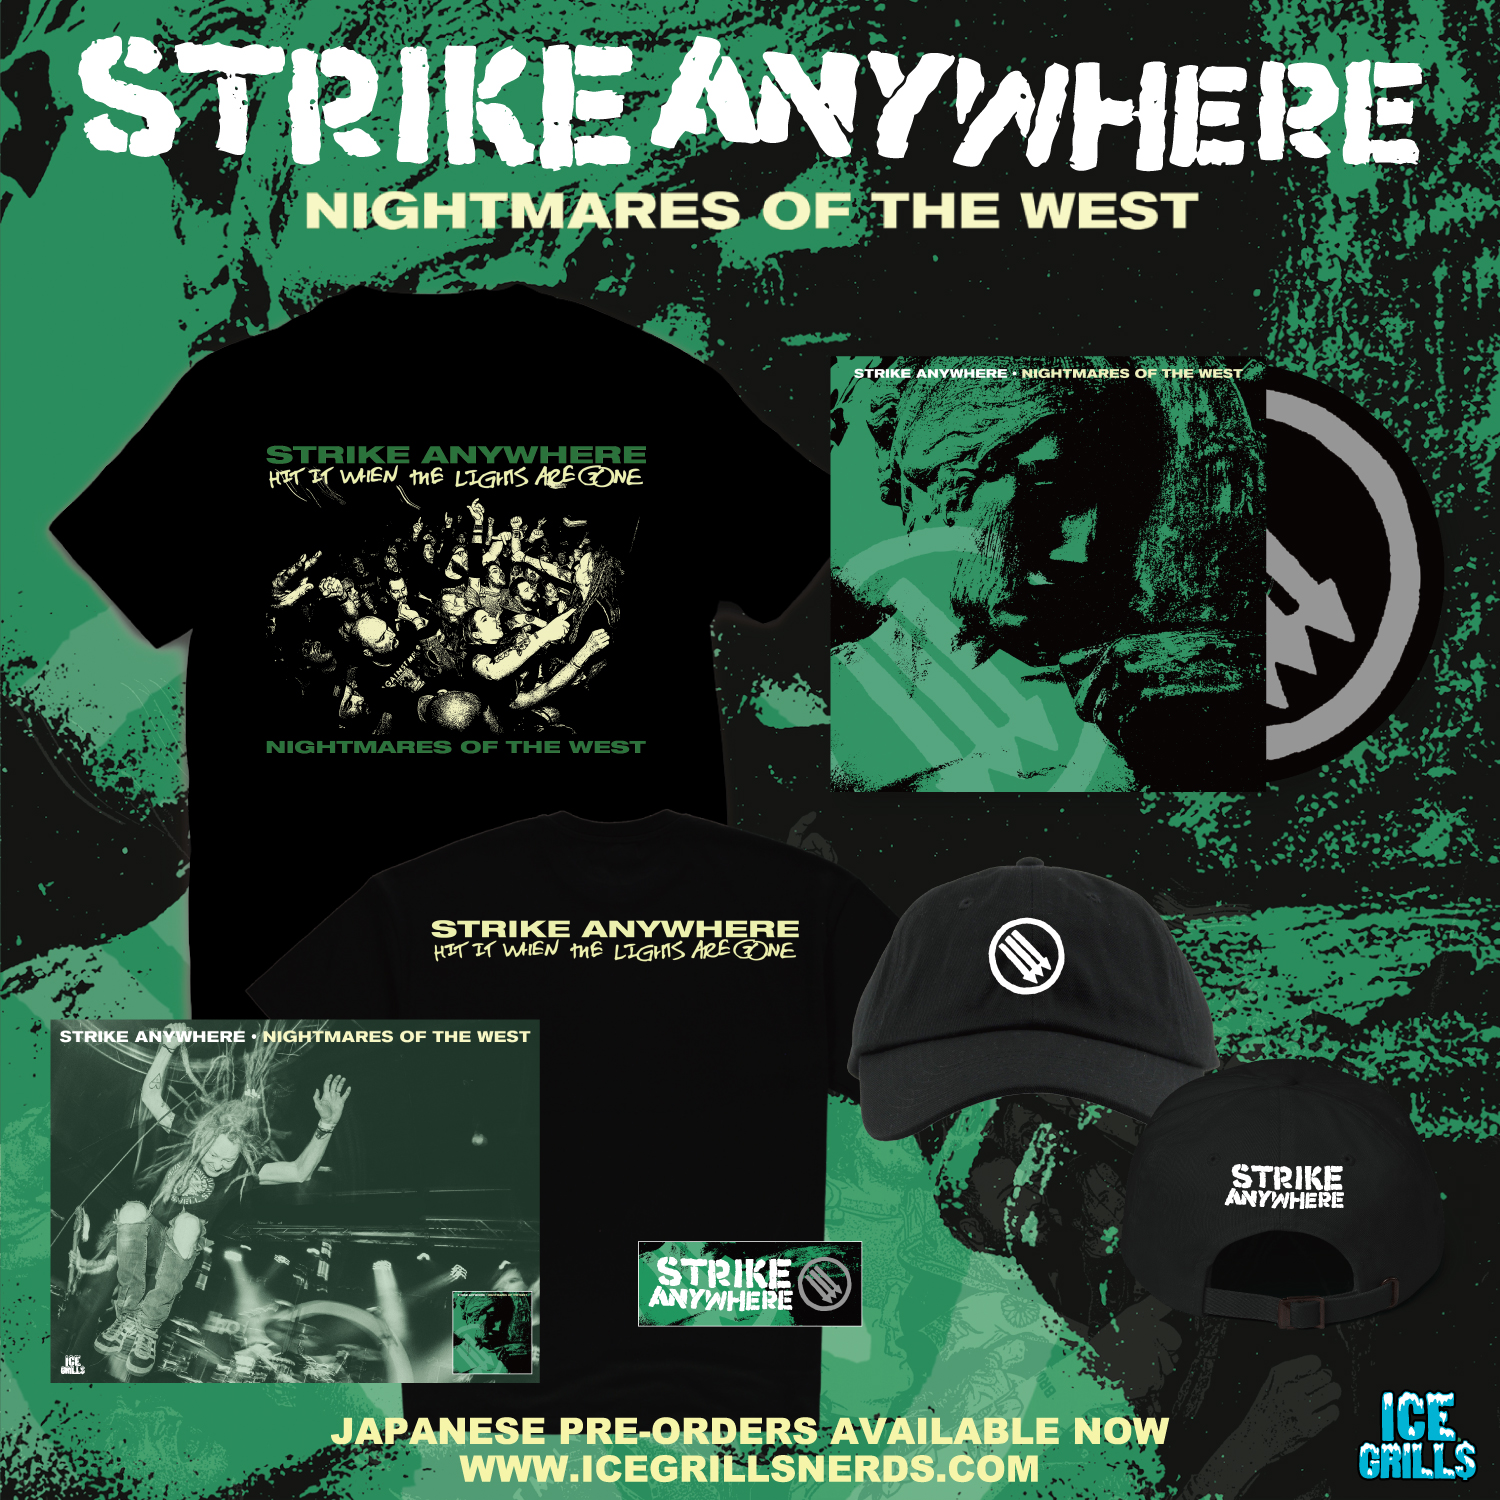 Strike Anywhere – New EP ‘Nightmares of the West’ Pre-orders